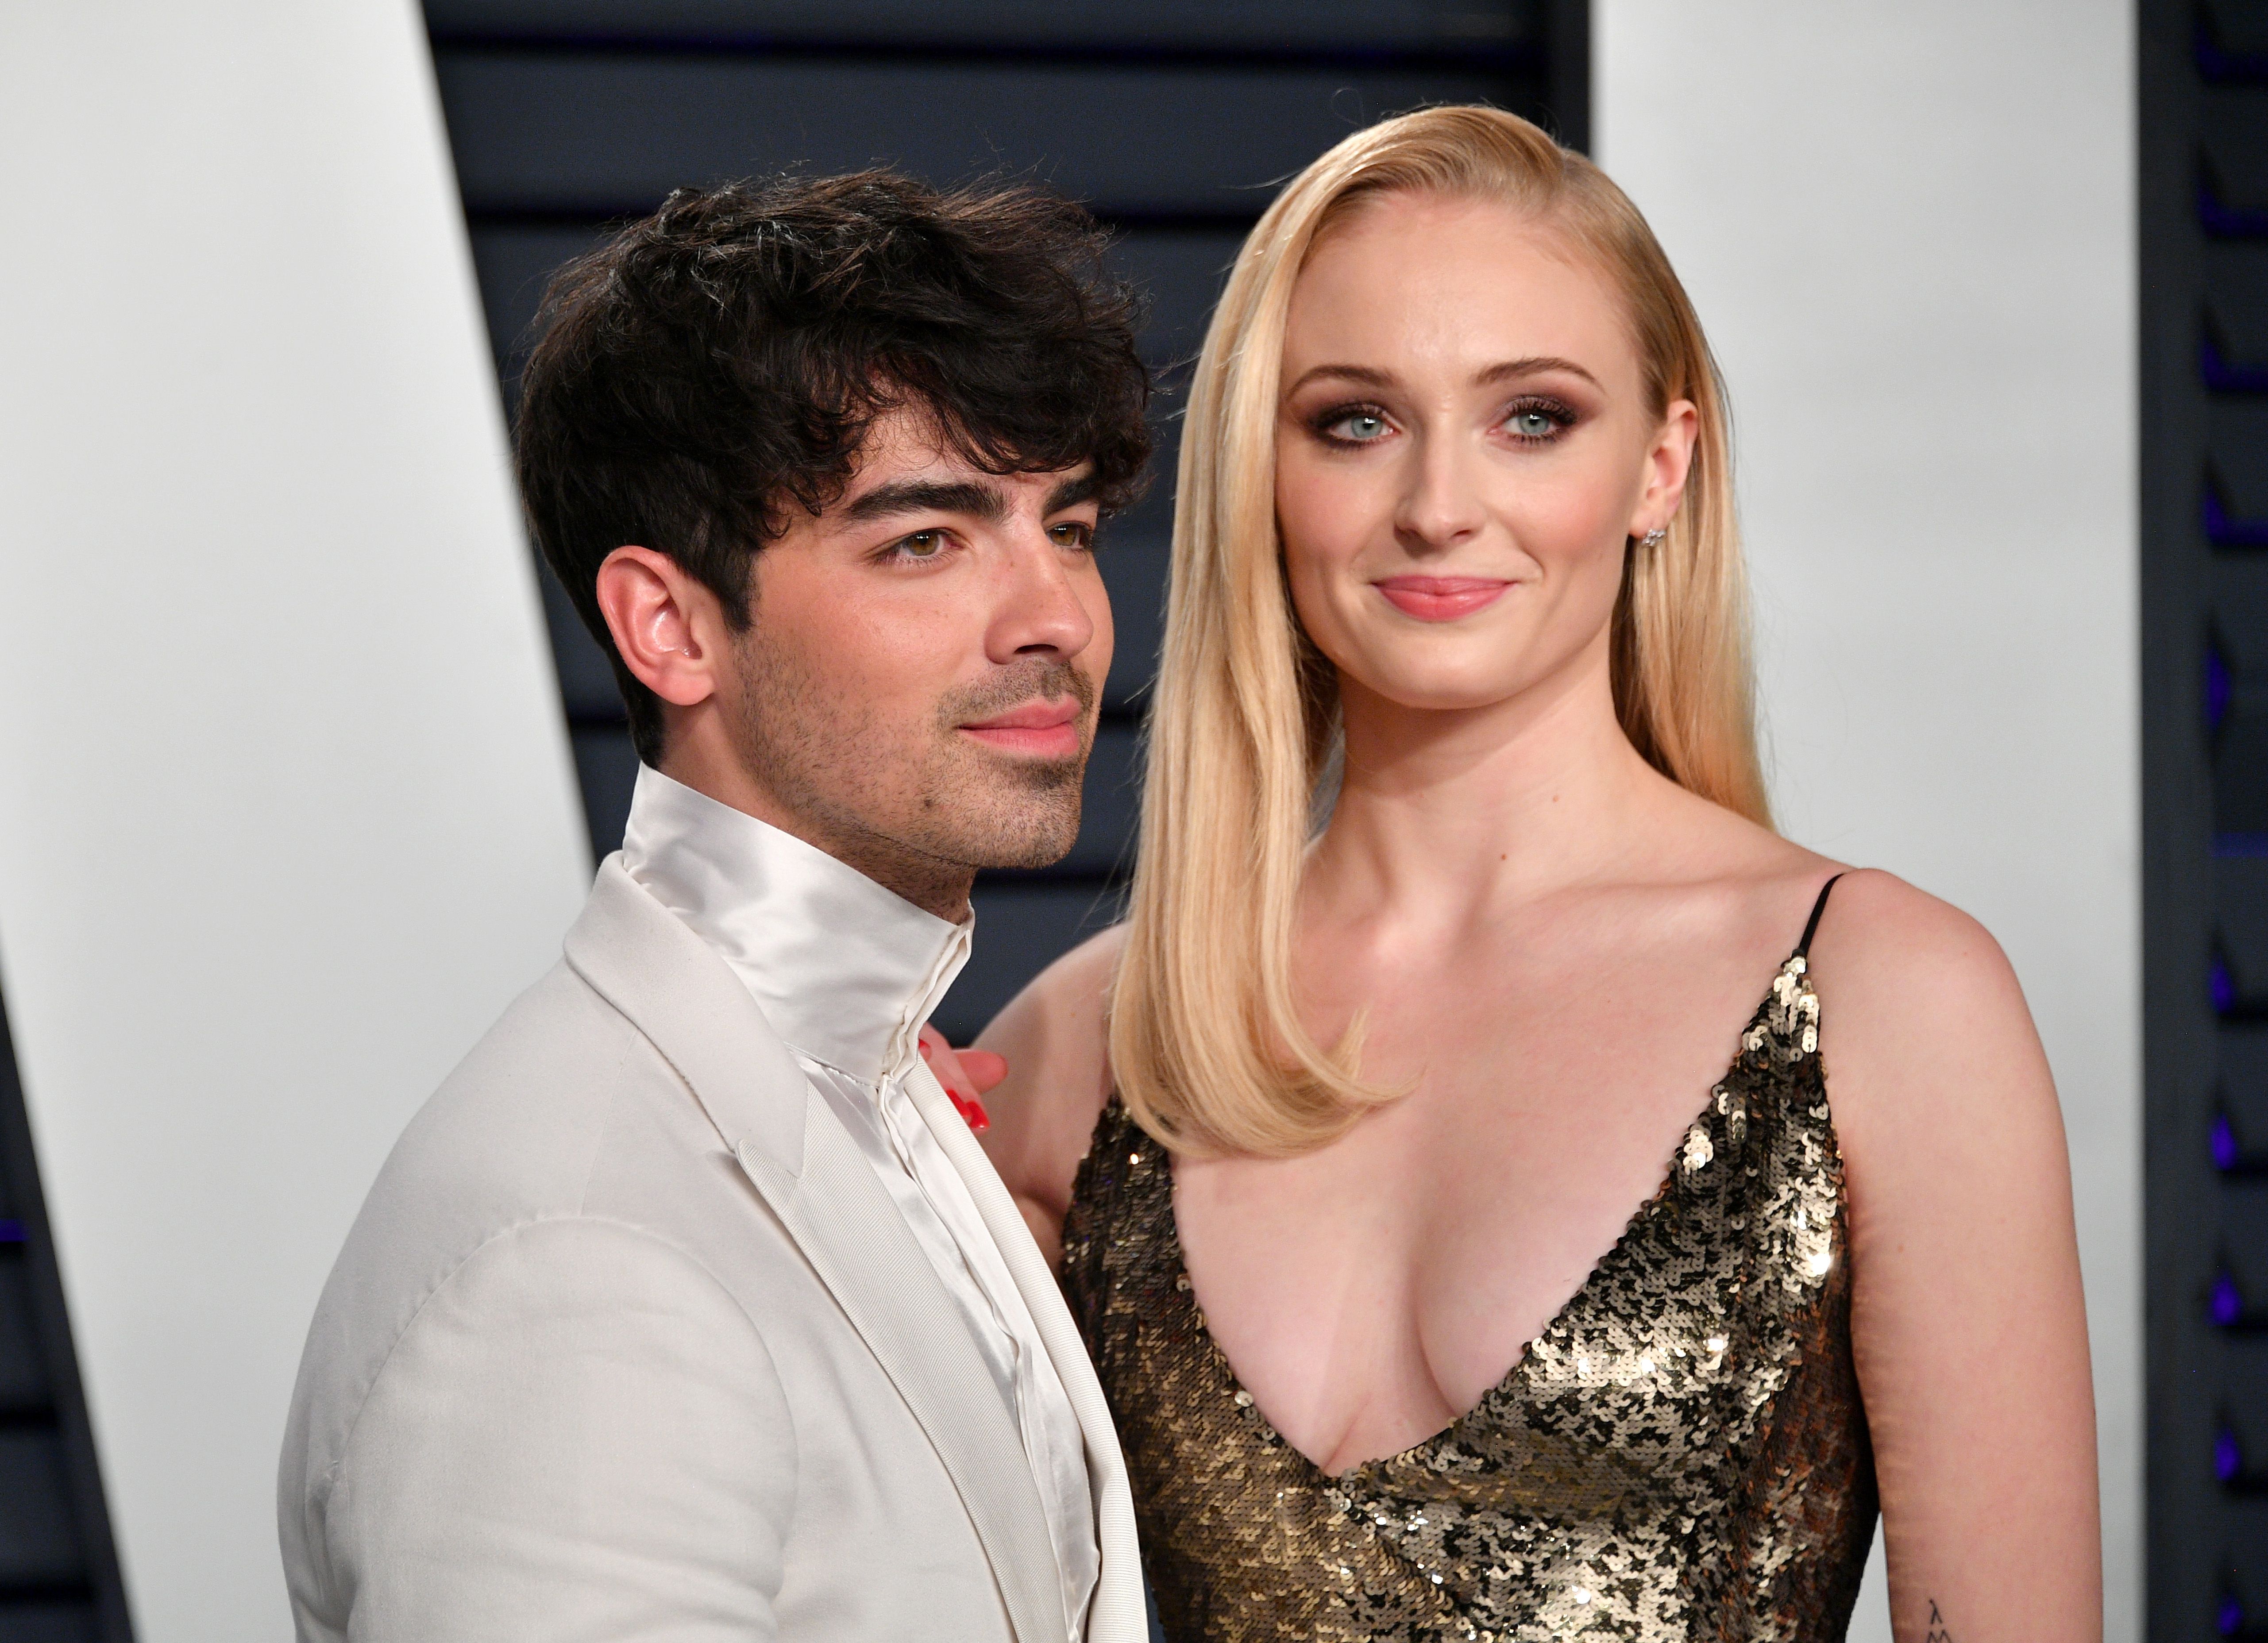 Joe Jonas and Sophie Turner during the 2019 Vanity Fair Oscar Party at Wallis Annenberg Center for the Performing Arts on February 24, 2019, in Beverly Hills, California. | Source: Getty Images